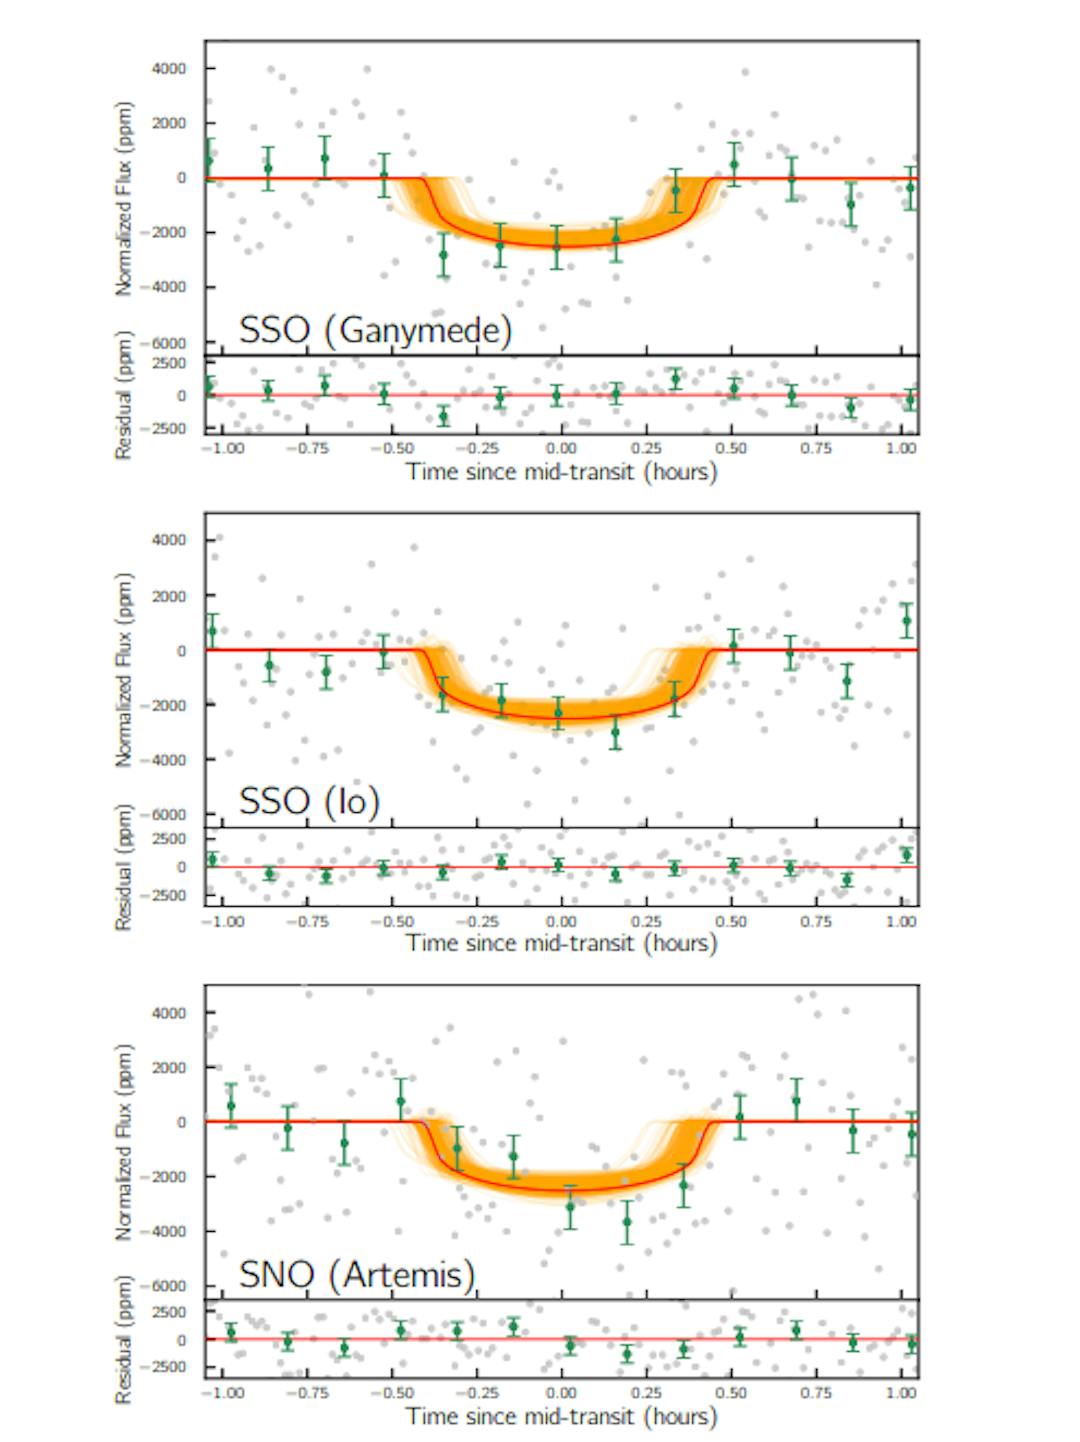 Figure 3. Top: First ground-based observation of K2-315b from Ganymede, SSO on UT 25 February 2020 at airmass of 1.03. Middle: Second ground-based observation by Io, SSO on UT 18 March 2020 at airmass of 1.01. Bottom: Third ground-based observation by Artemis, SNO on UT 18 May 2020 at airmass of 1.77. The best-fit model, obtained from simultaneous fitting of K2 and SPECULOOS data, is shown in red with 350 randomly selected models from MCMC posteriors shown in orange. The silver points are the detrended flux using second-order polynomials in airmass and FWHM. The green points corresponds to flux bins of 10 minutes.